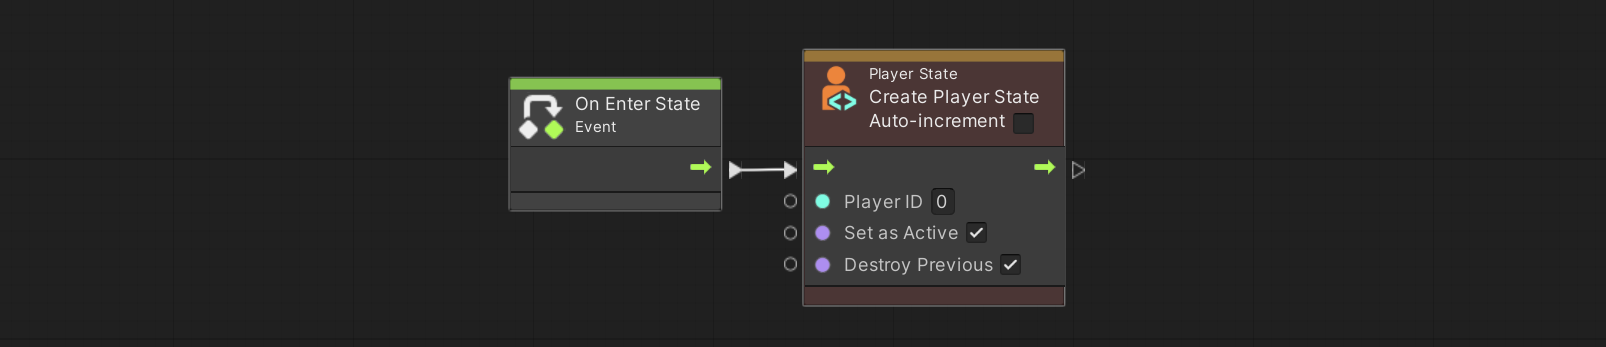 Create Player State